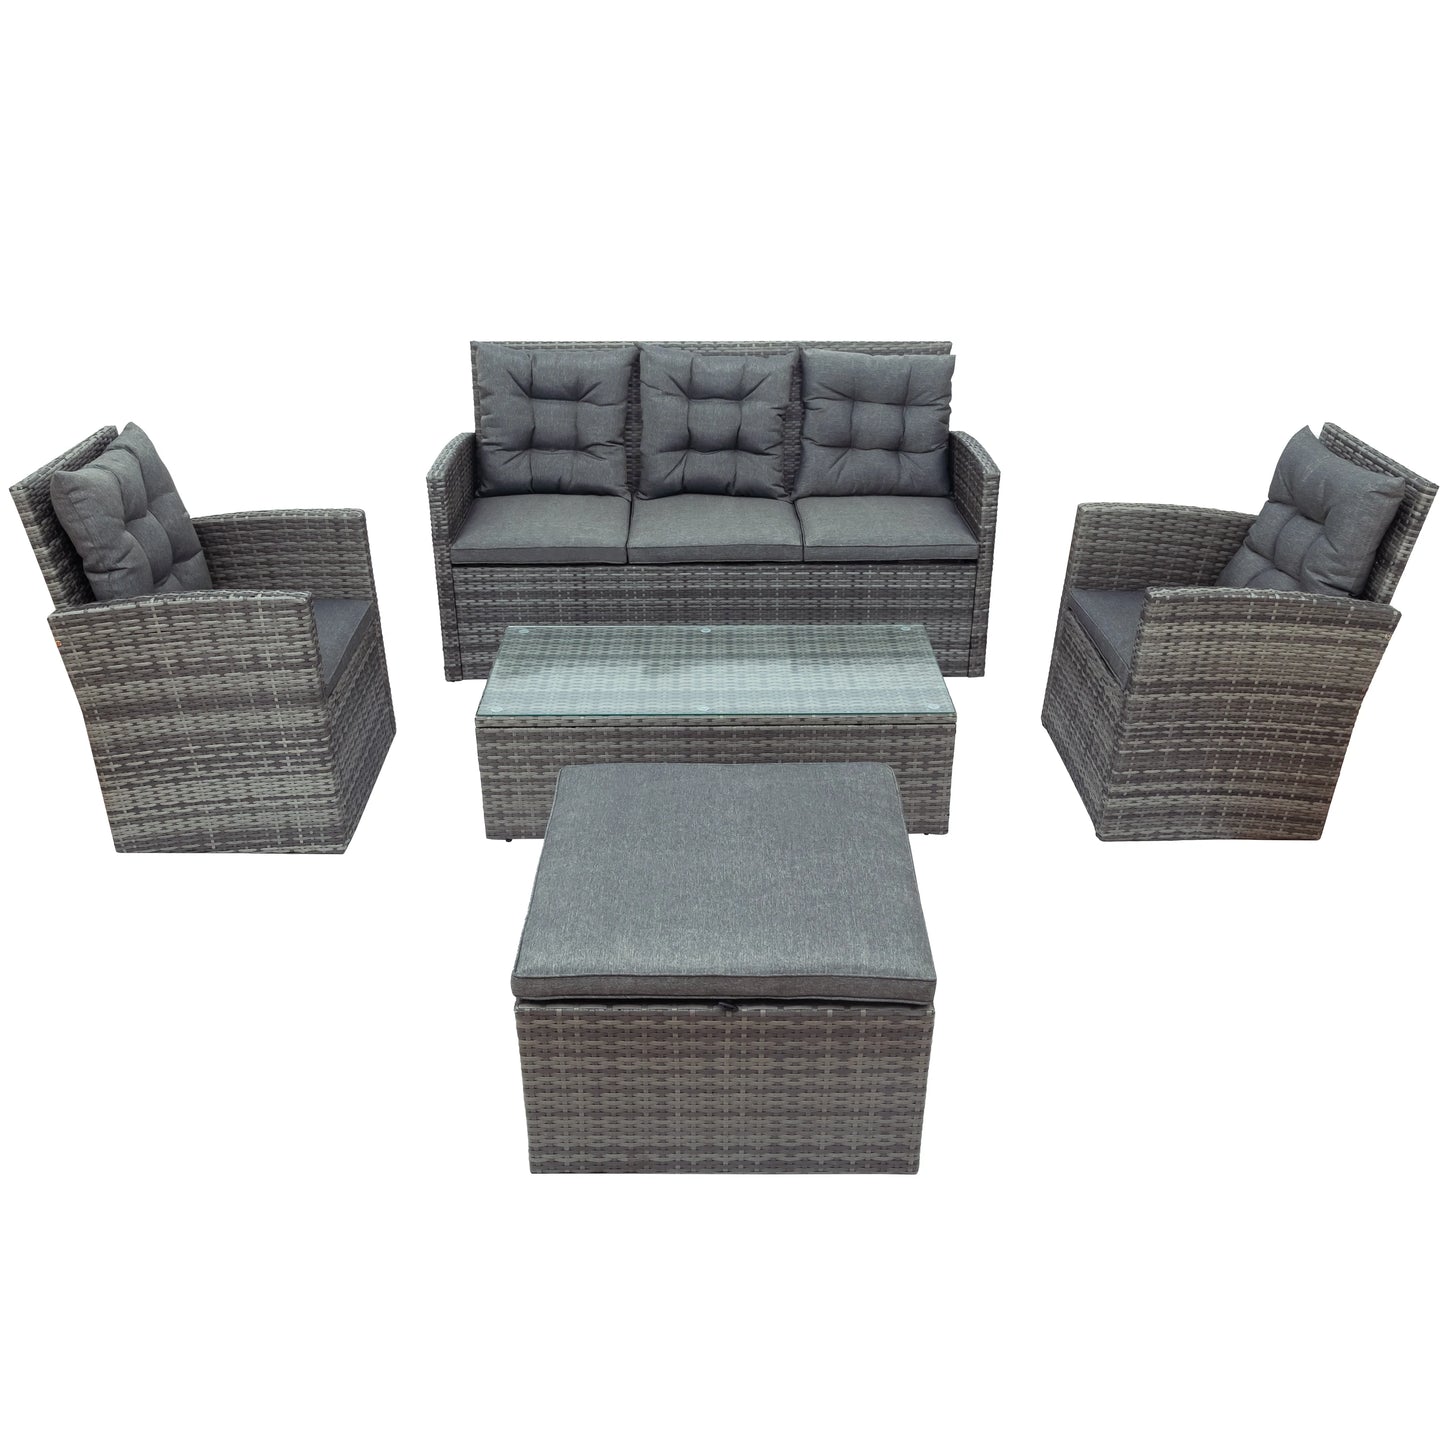 5-piece Outdoor Patio Sofa Set with Storage Bench, Wicker Furniture with Glass Table